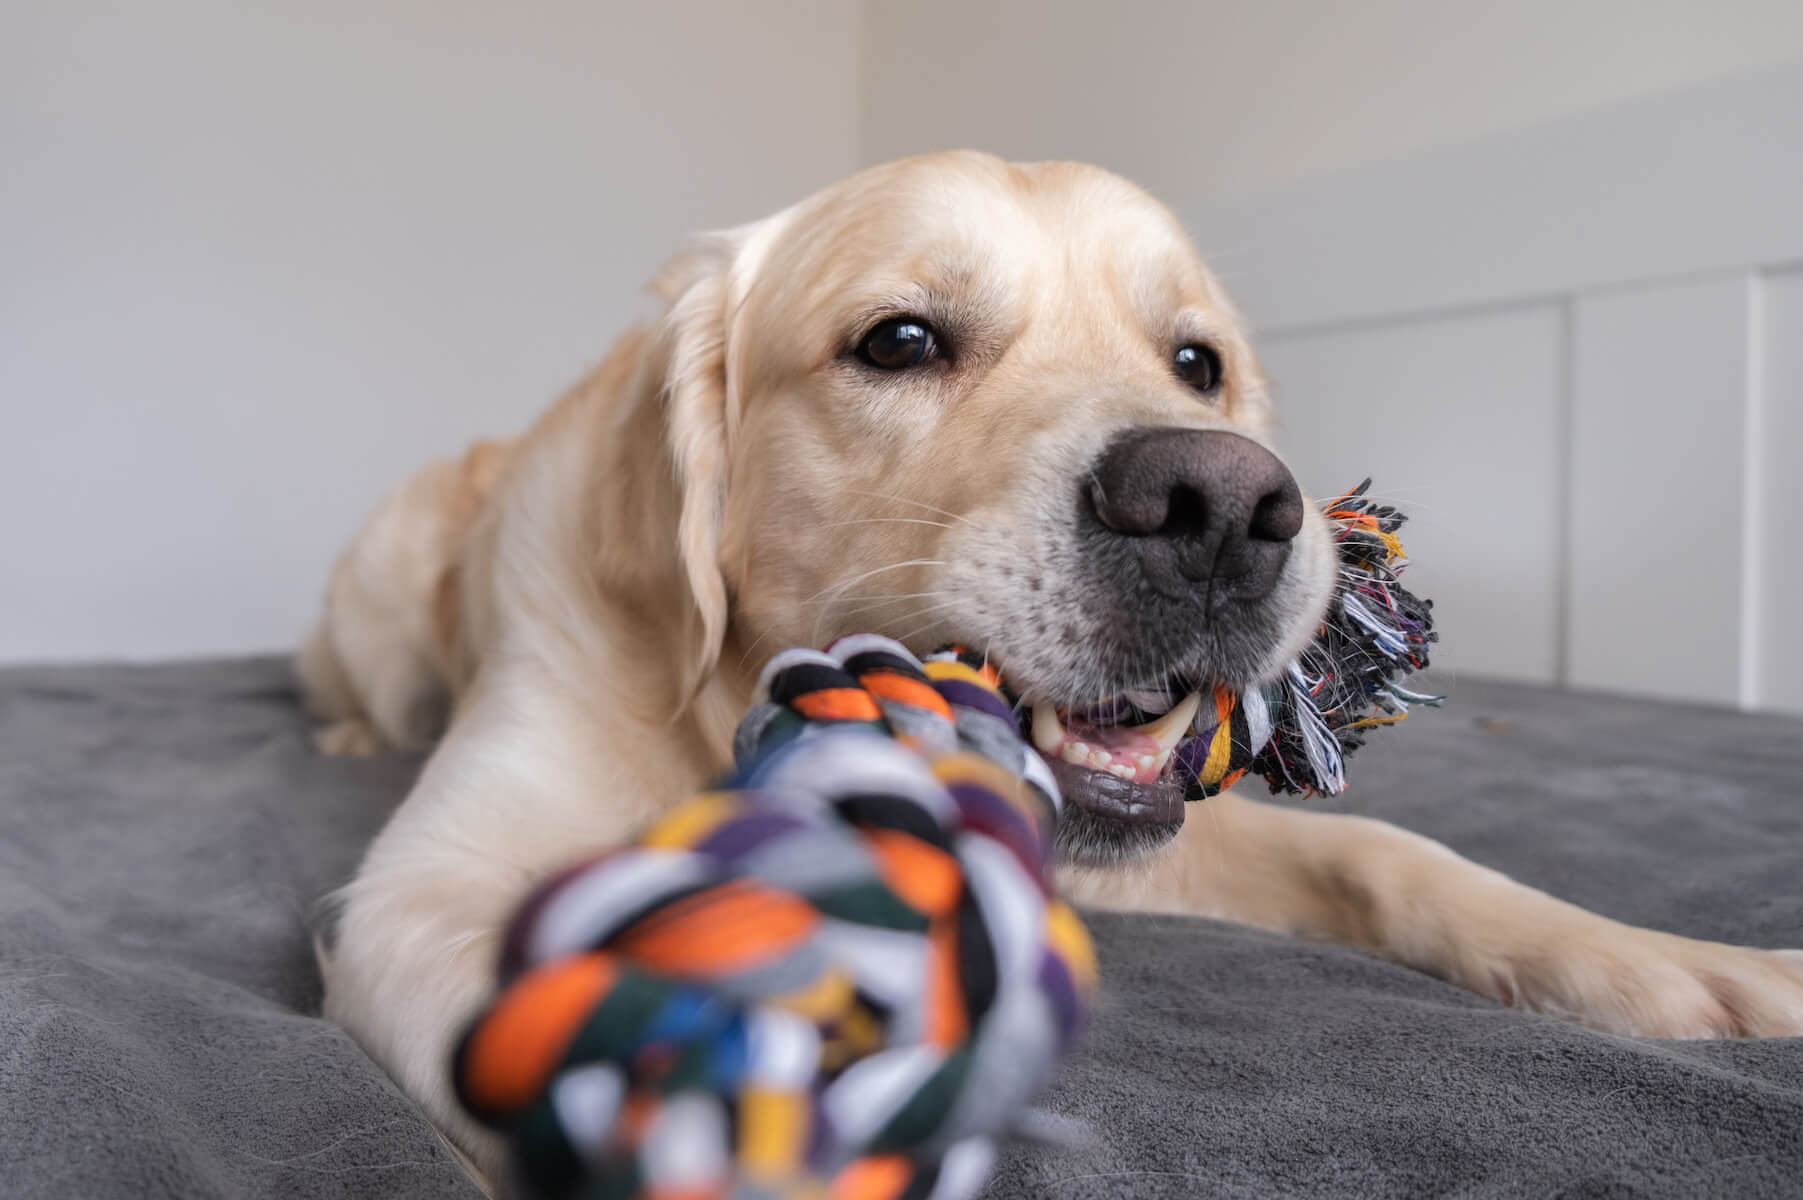 Dog holding a clean dog toy rope in mouth